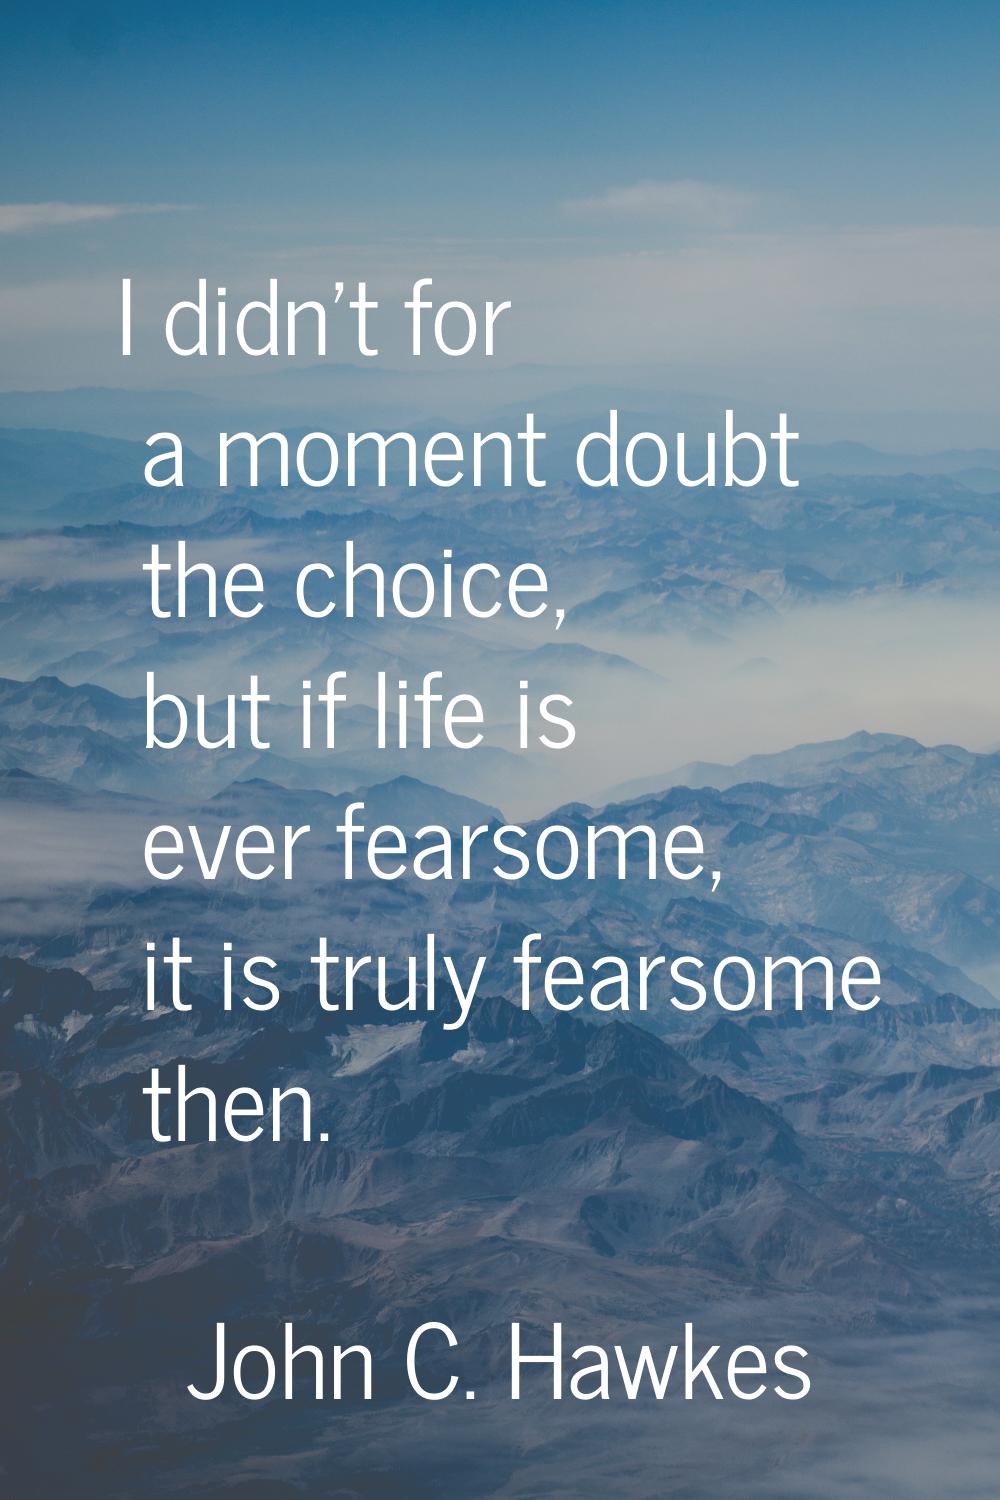 I didn't for a moment doubt the choice, but if life is ever fearsome, it is truly fearsome then.